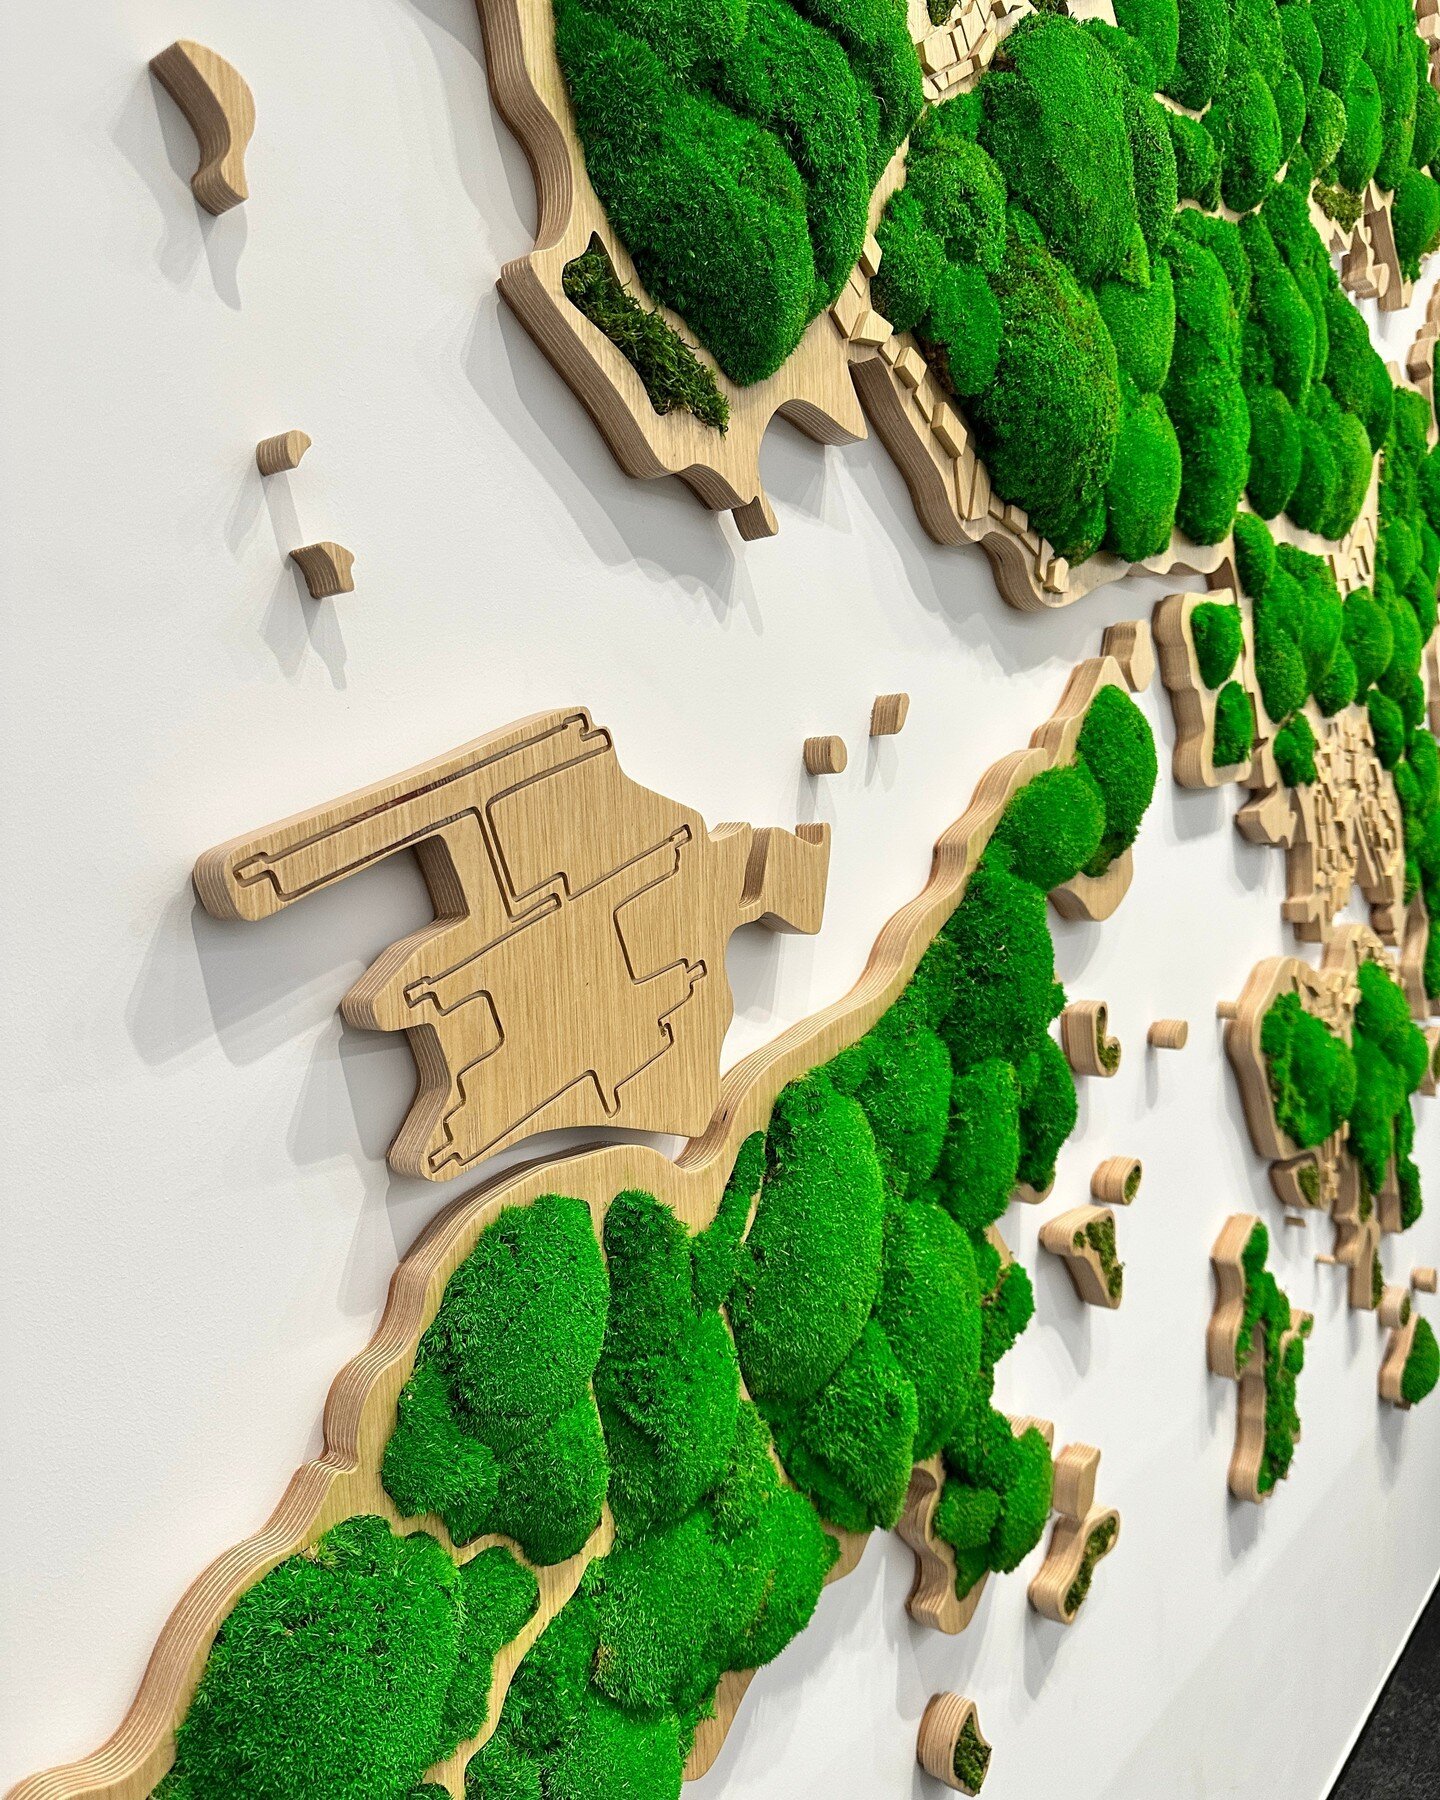 &lsquo;Biophilia&rsquo; refers to our natural attraction towards nature. Here are some ways we have incorporated biophilia into our office designs, as a reminder of the calmness nature can bring us:
- Wall map with green elements
- Nature-themed meet